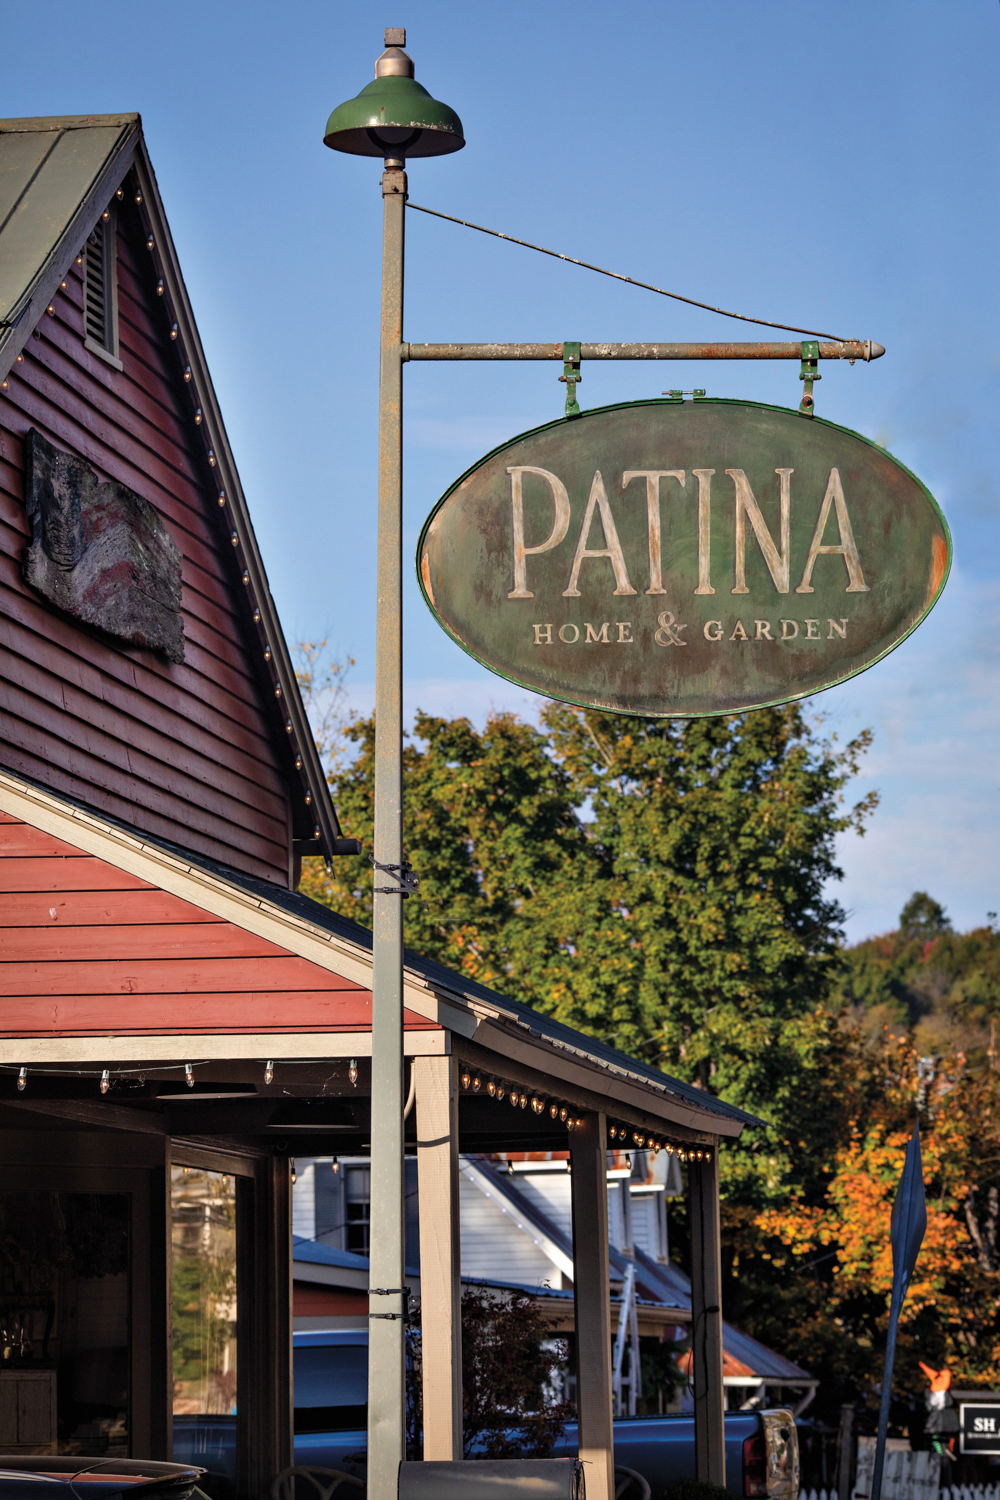 Patinated antique shop sign for Patina Home & Garden